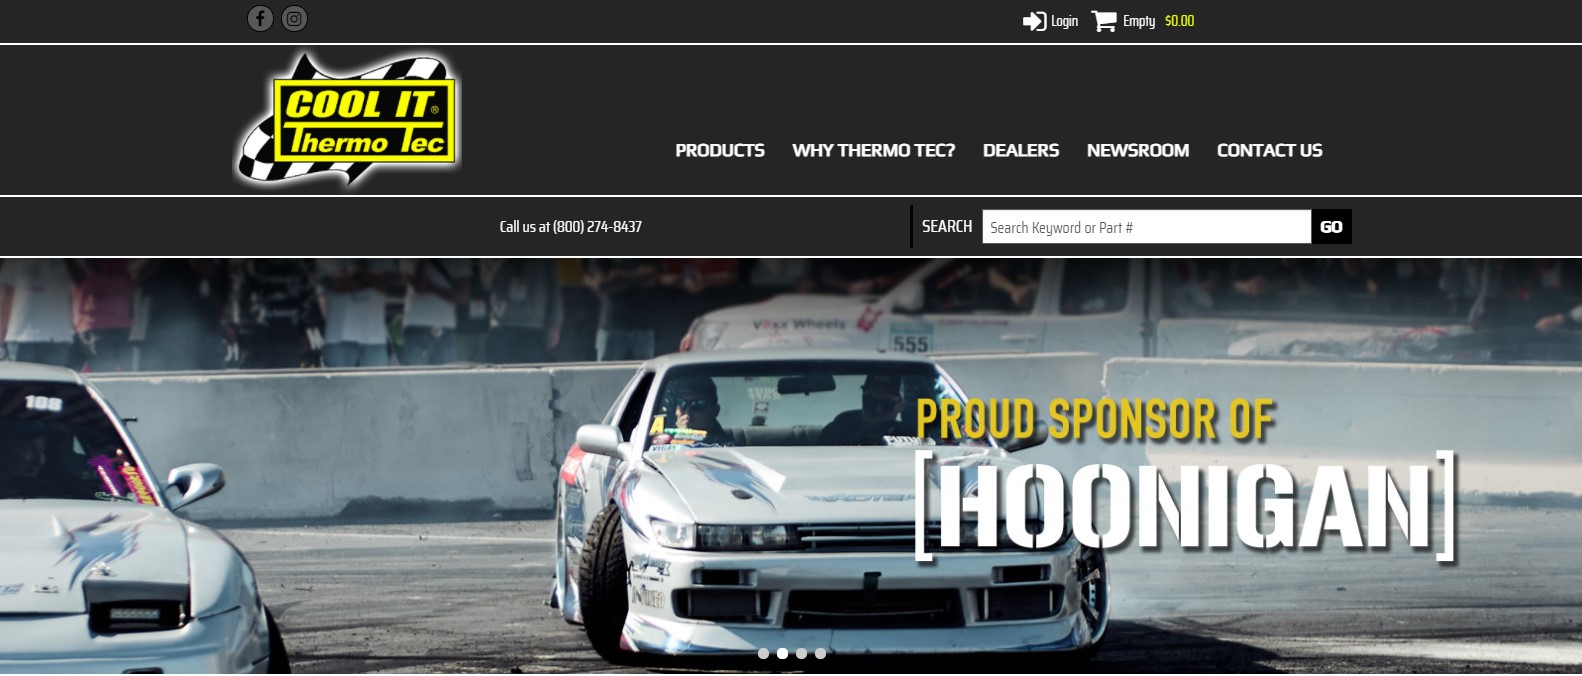 Thermo-Tec Launches New Website | THE SHOP